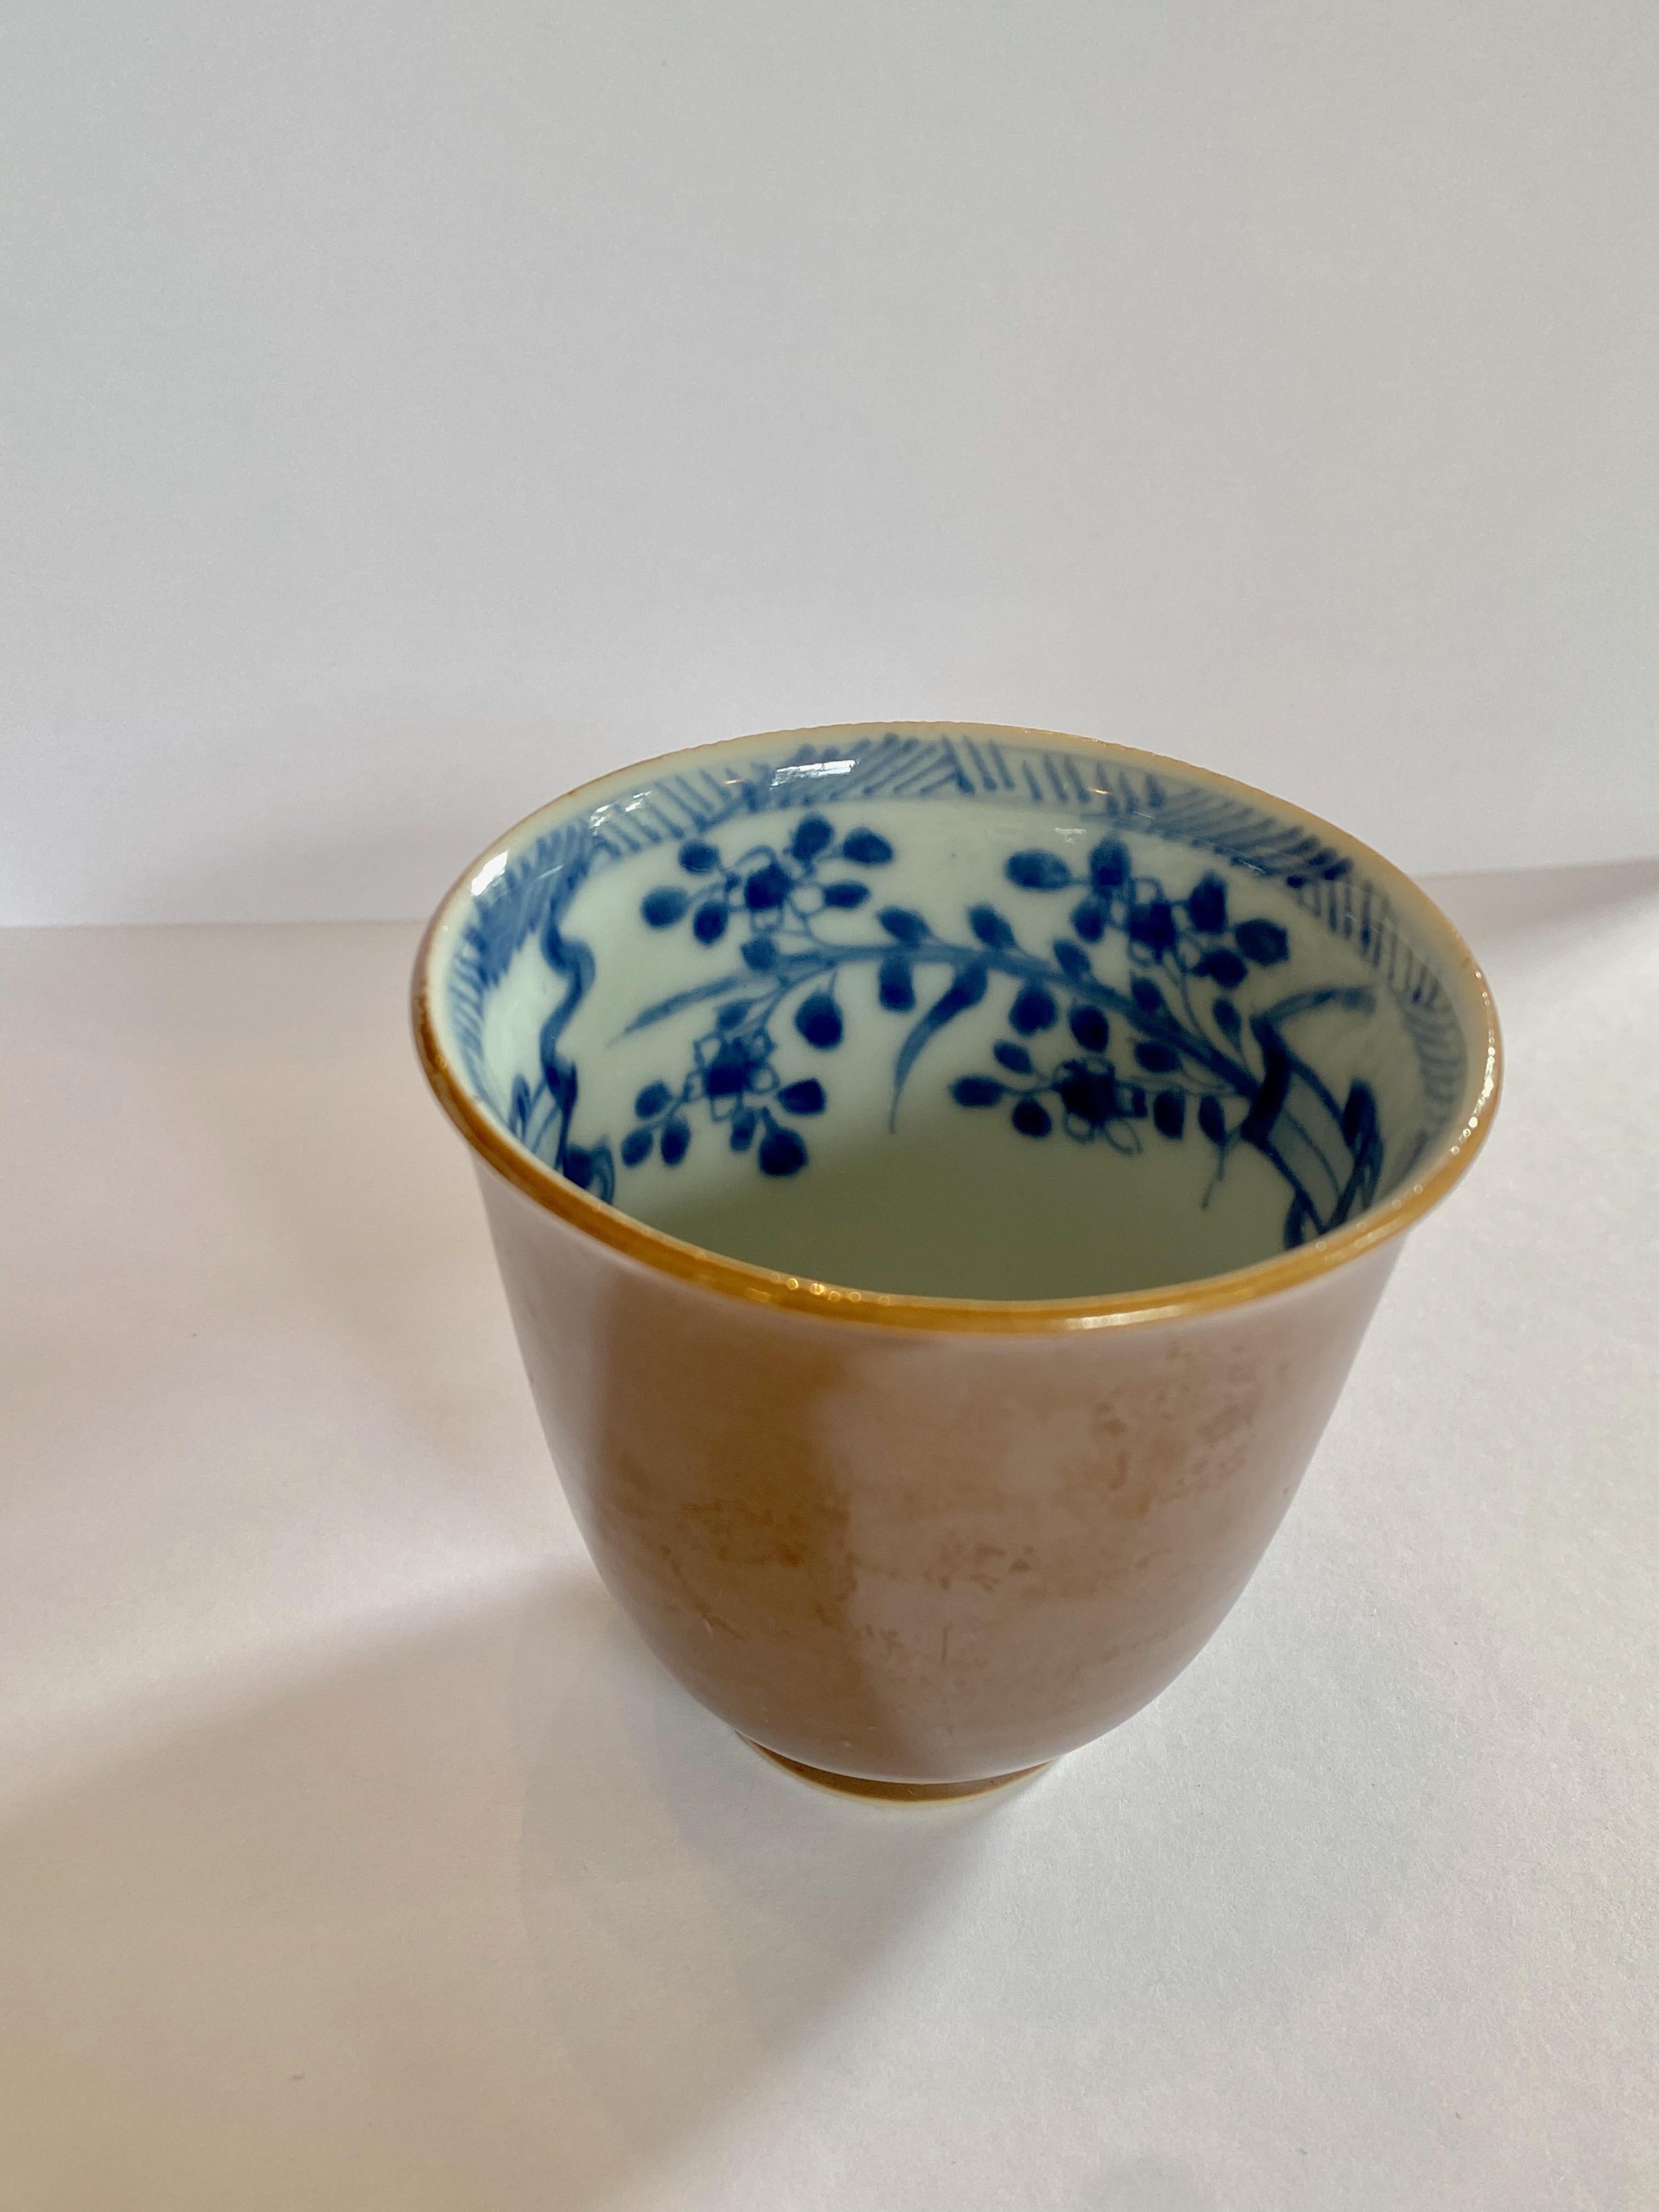 18th century porcelain cup, Qianlong period (1735-1796) of the Qing Dynasty. 
This elegant cup has a nearly iridescent cafe au lait (light brown) exterior glaze and blue and white interior decorated with ribbons and flowers, making a delightful